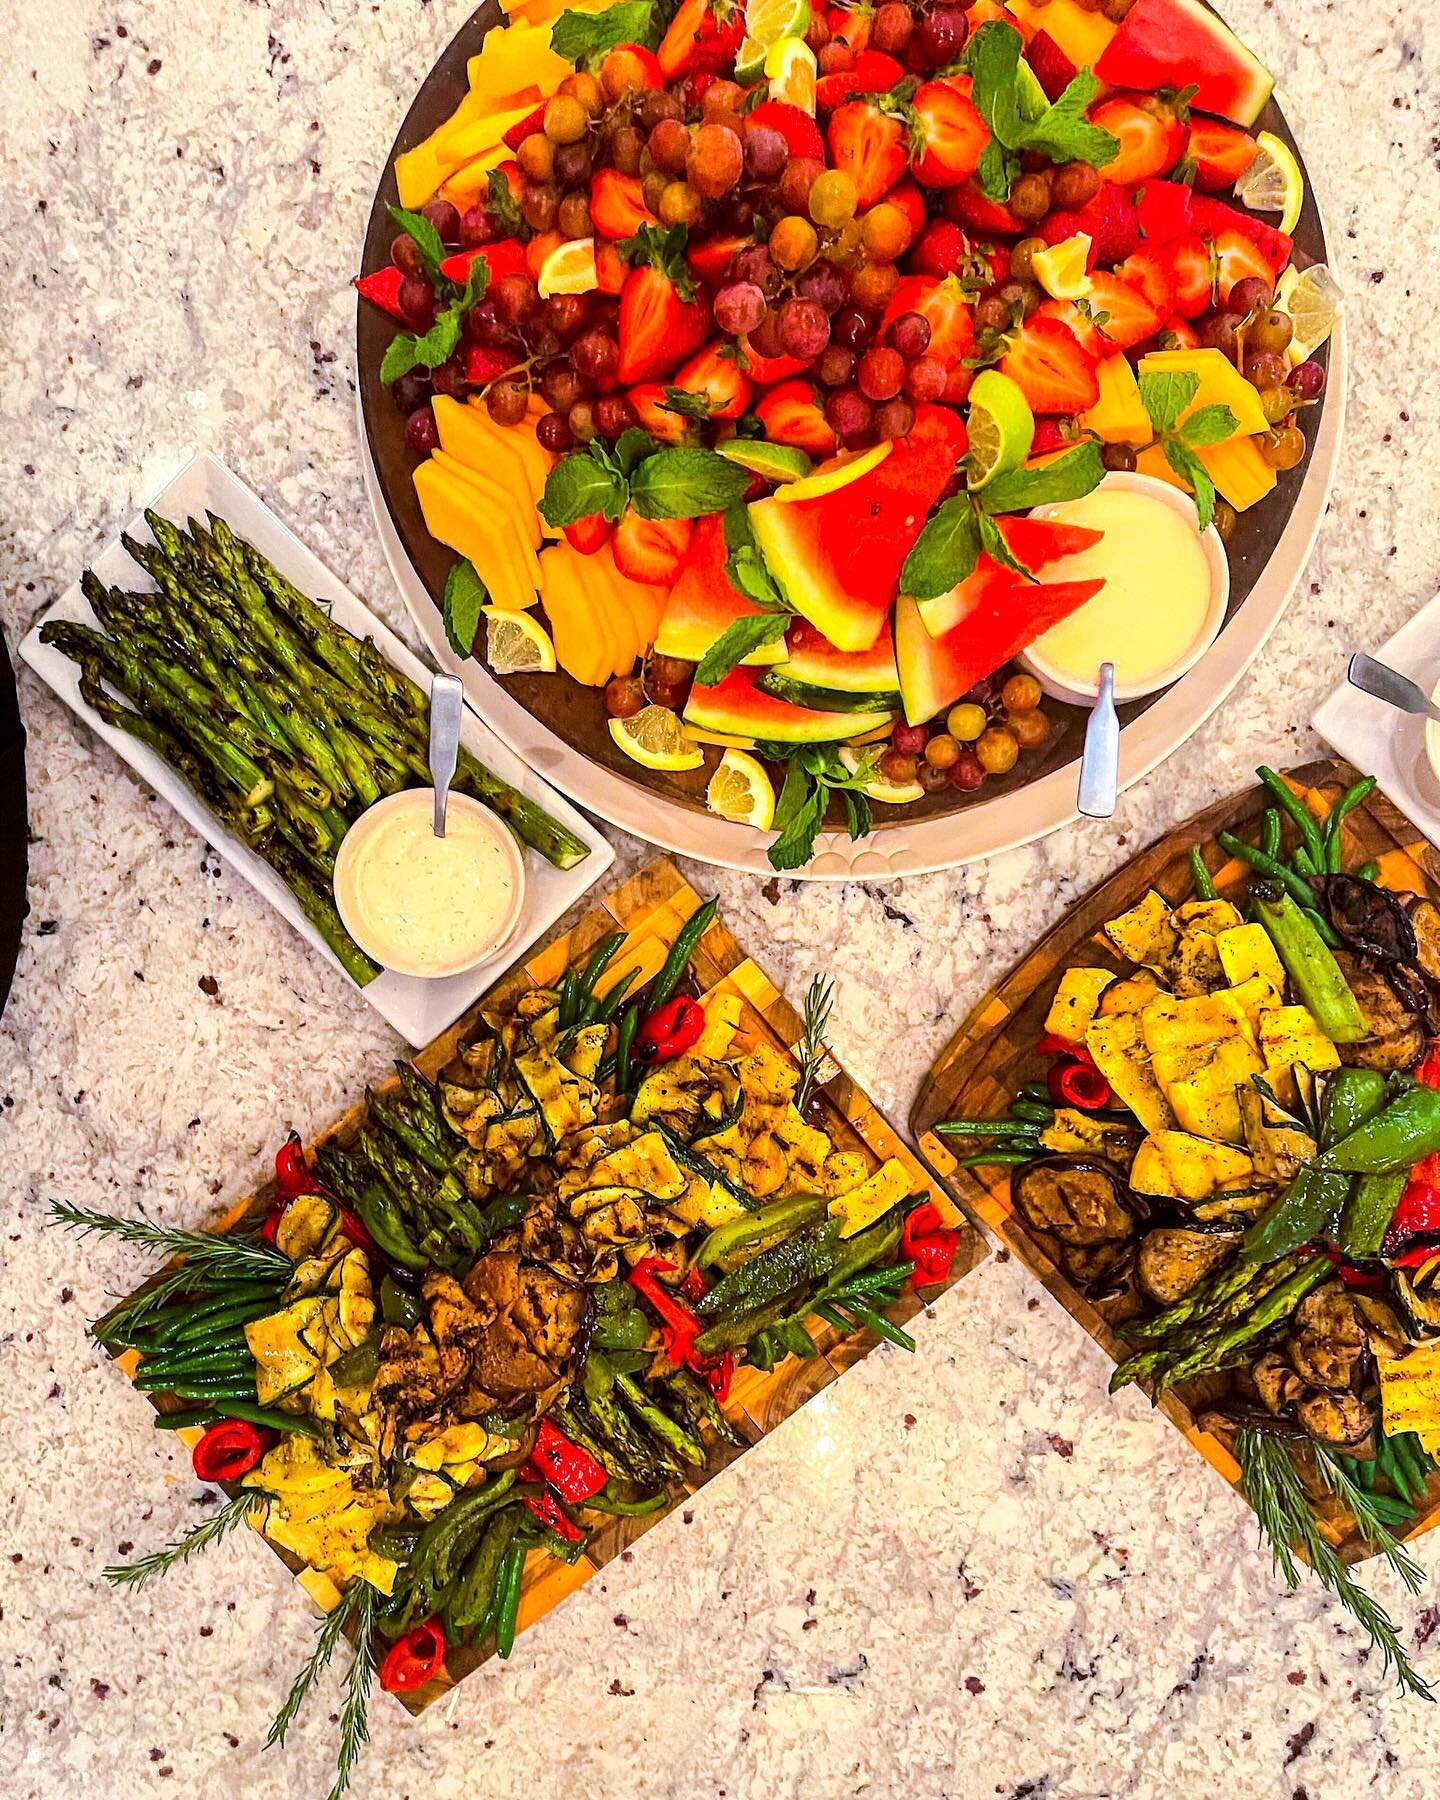 We love a good dinner party! 
.
.
.
.
.
.
.
.
.
#plazacatering #plazacaterers #catering #homemade #dinnerparty #caterers #kccatering #kc #kansascity #kcevents #kcparty #crudite #grazingboard #dinnerisserved #eventcatering